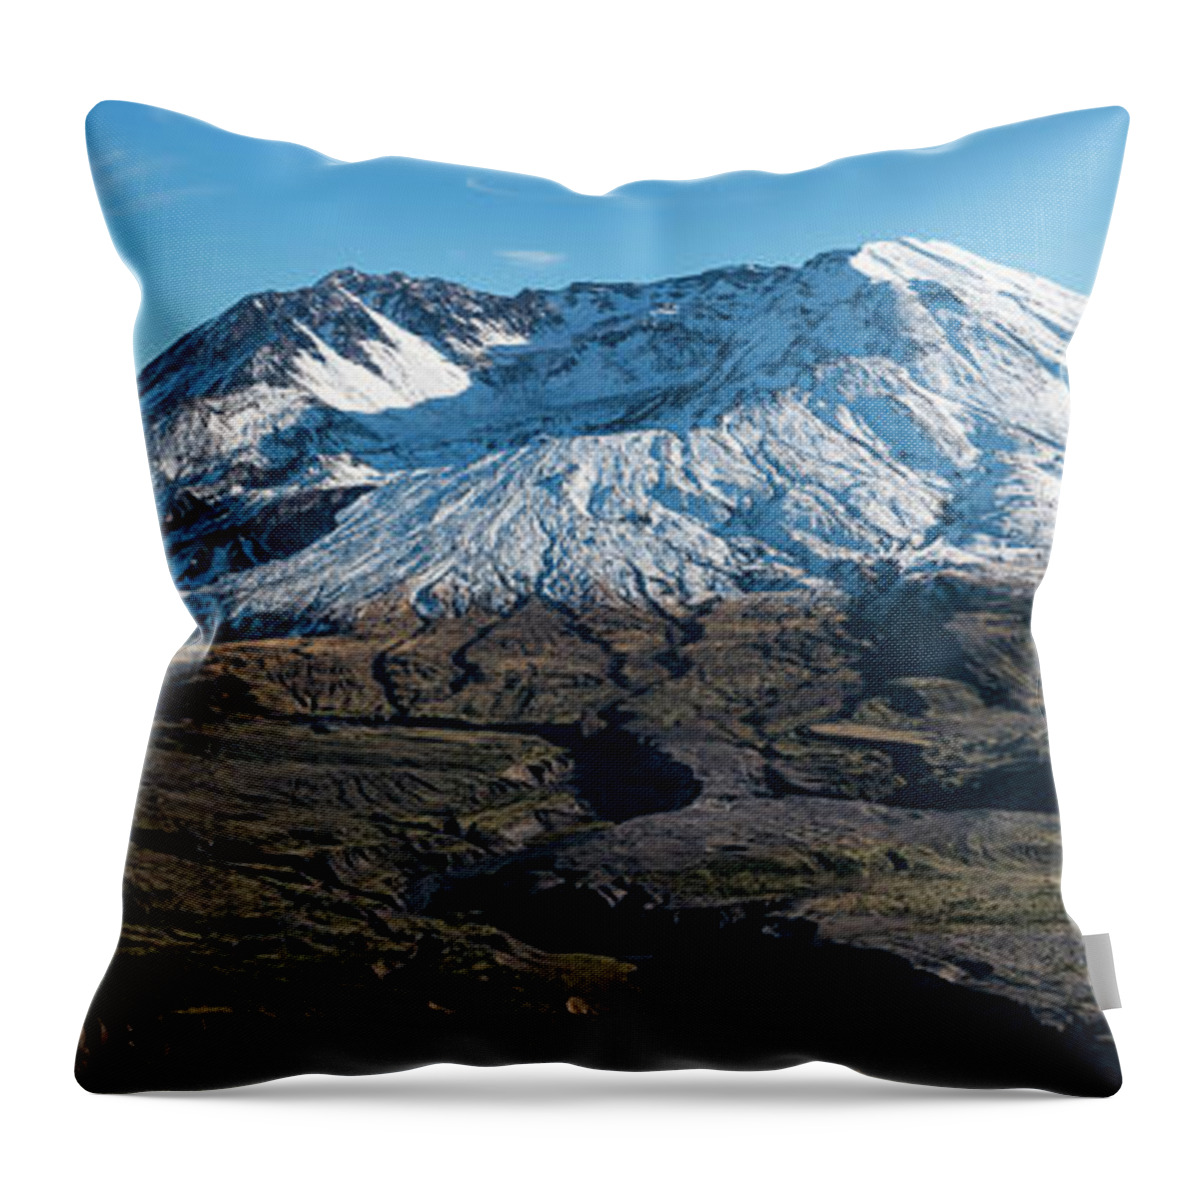 Autumn Throw Pillow featuring the photograph Mount St. Helens by Robert Potts